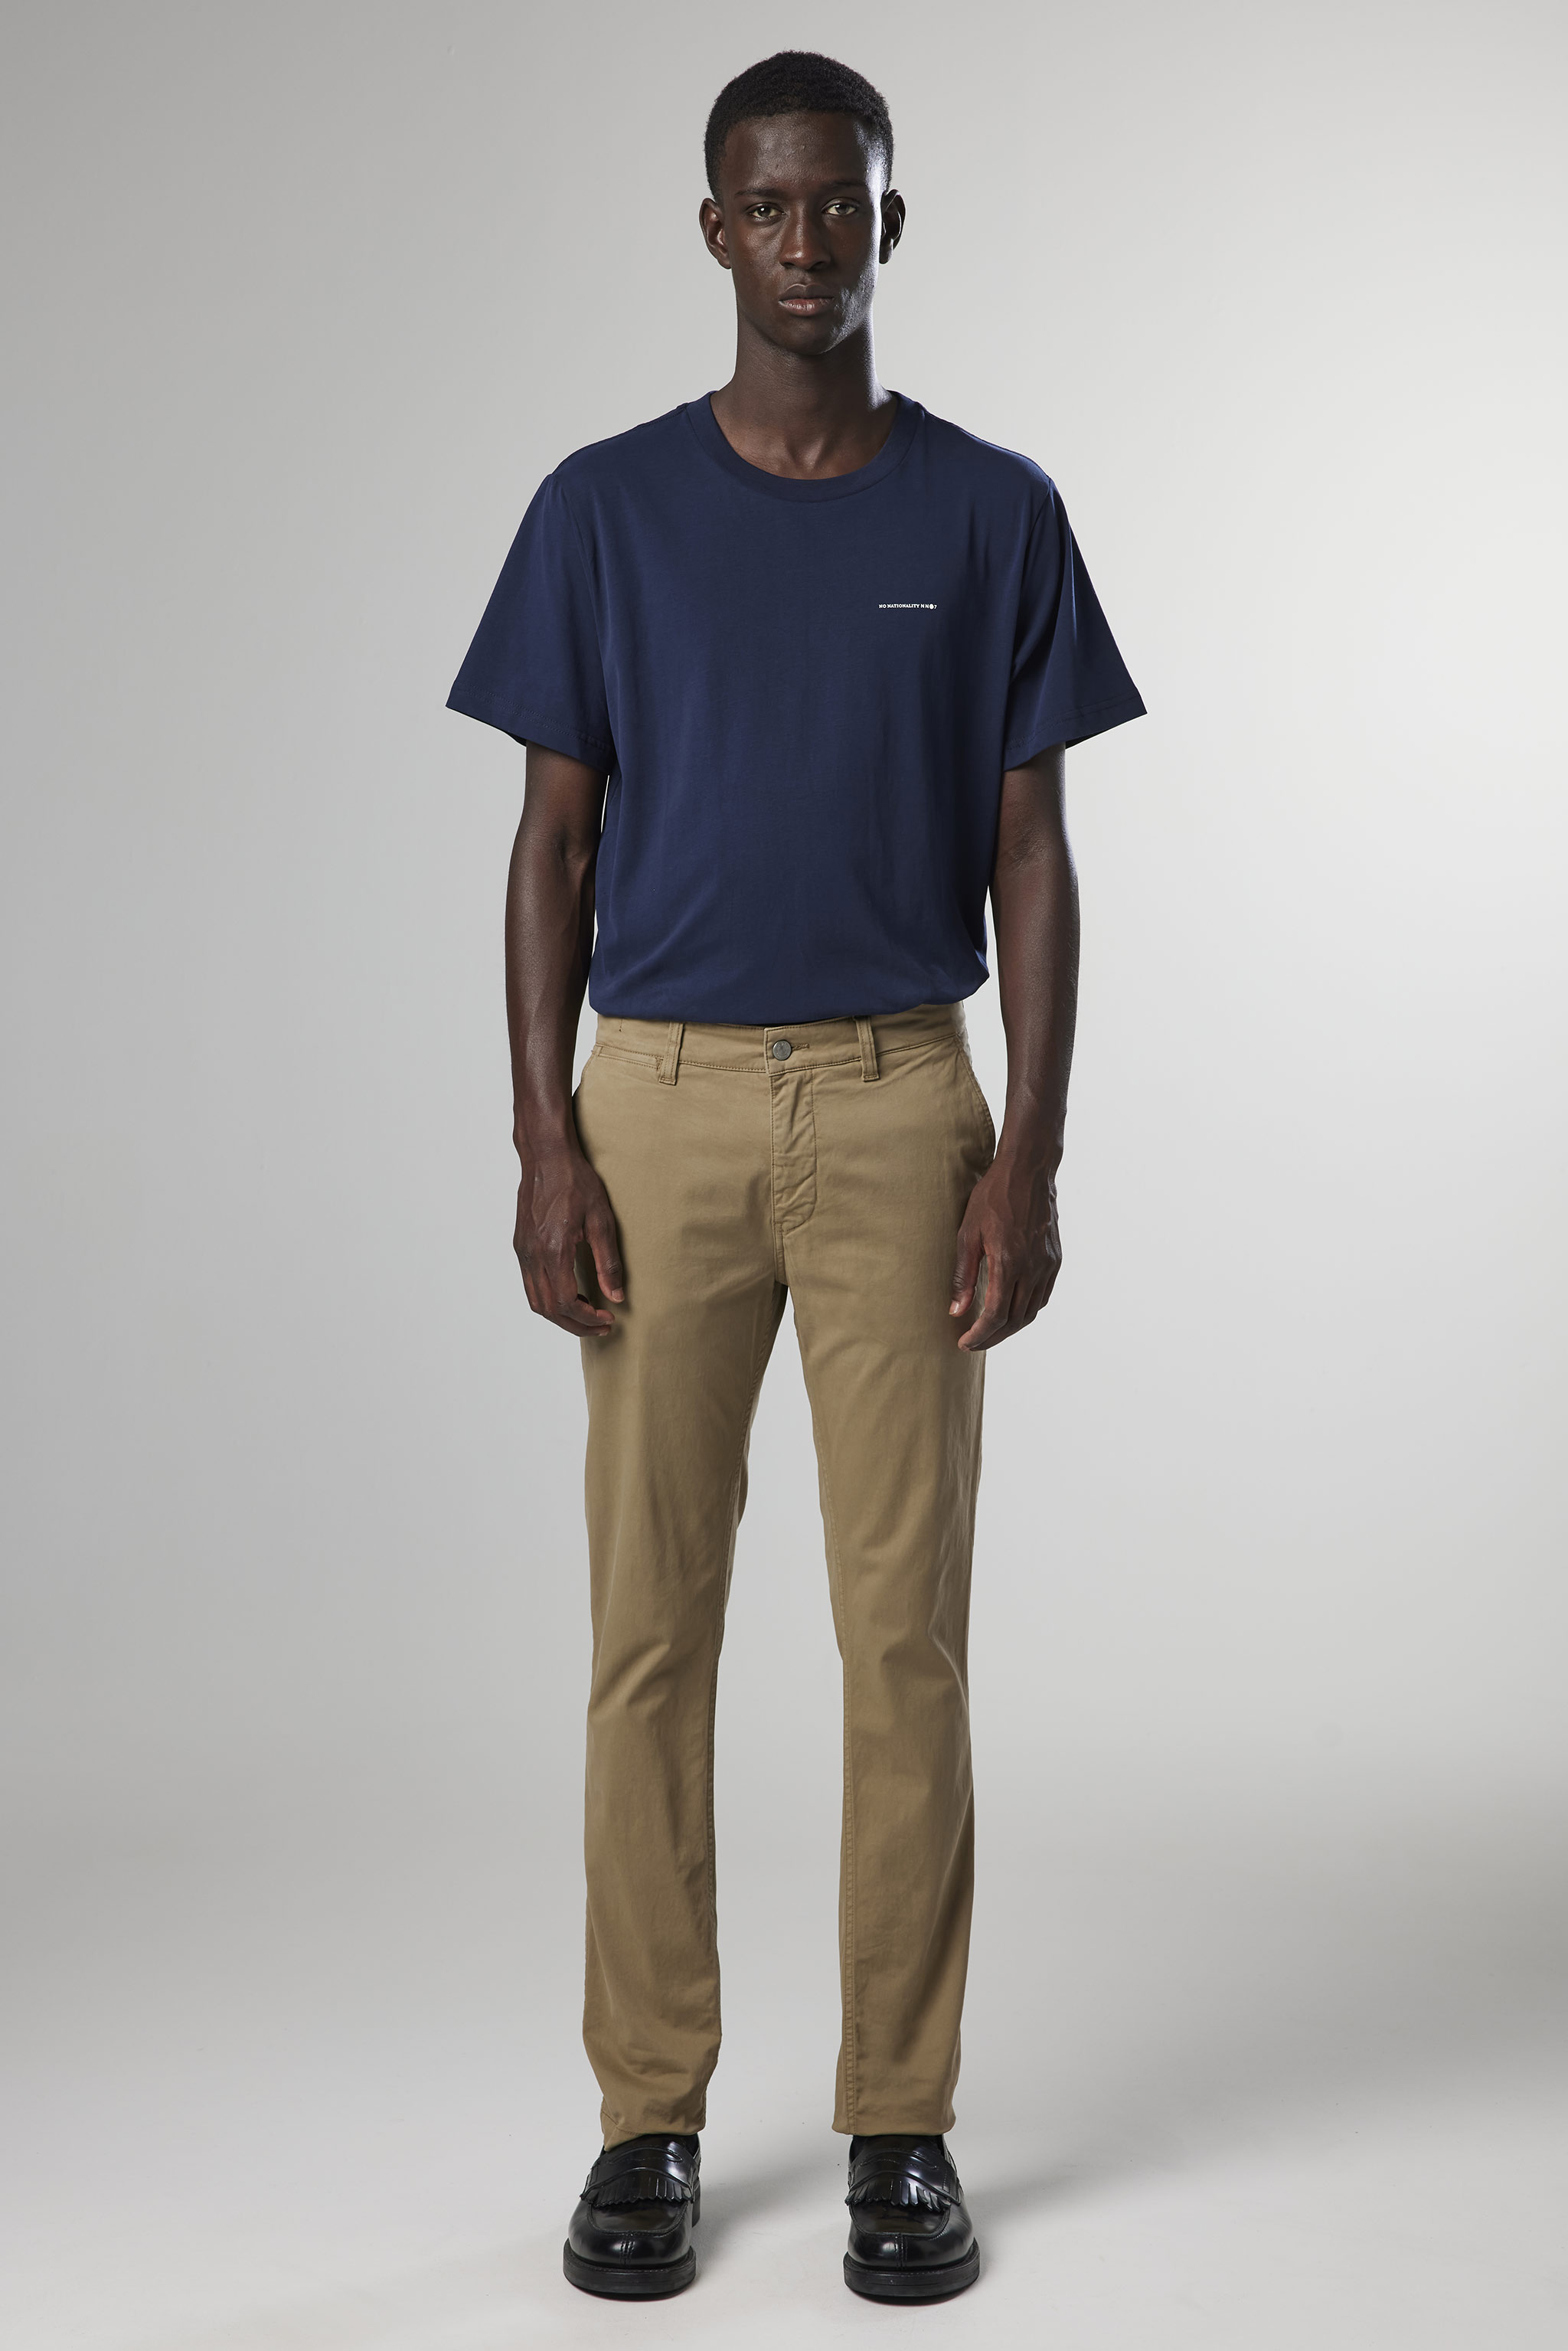 Marco 1400 men's chinos - Green - Buy online at NN.07®